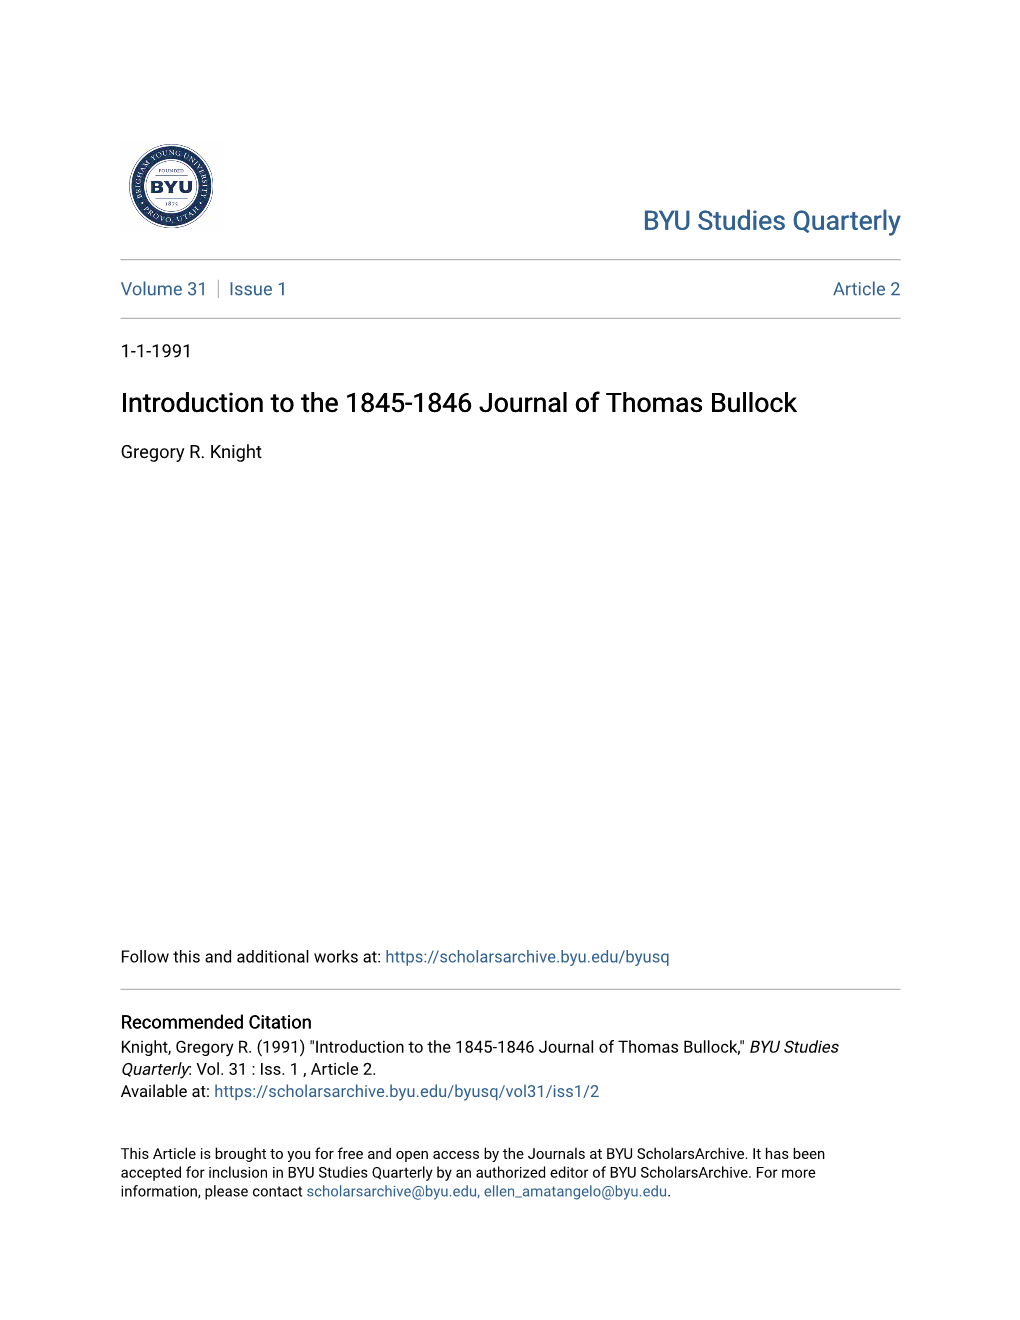 Introduction to the 1845-1846 Journal of Thomas Bullock